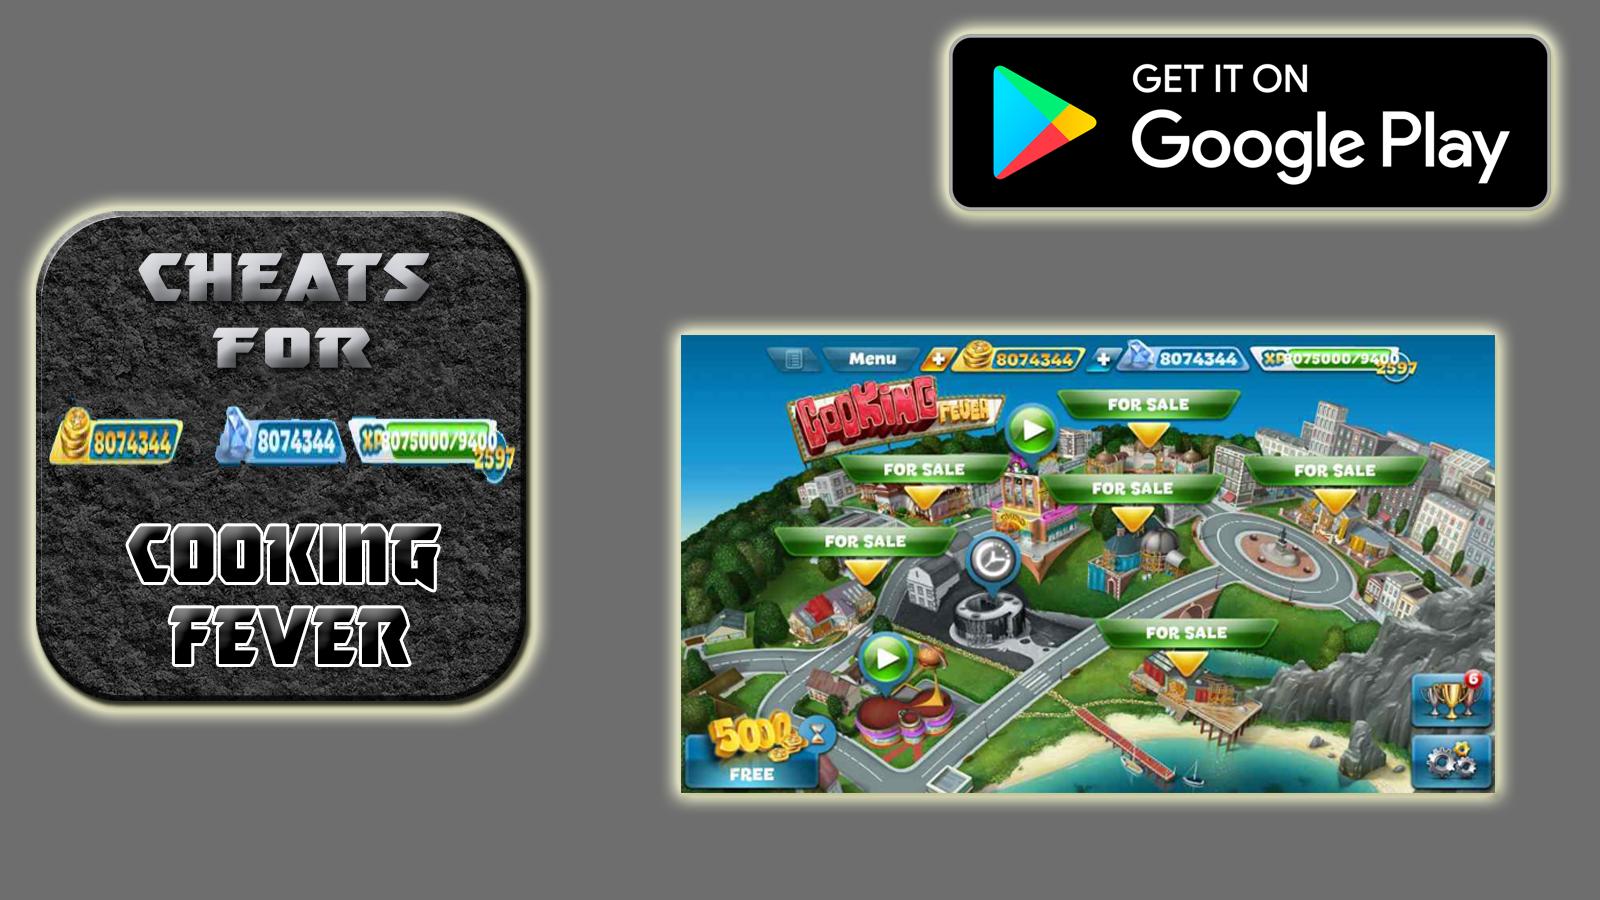 Cheats For Cooking Fever Best Prank For Android Apk Download